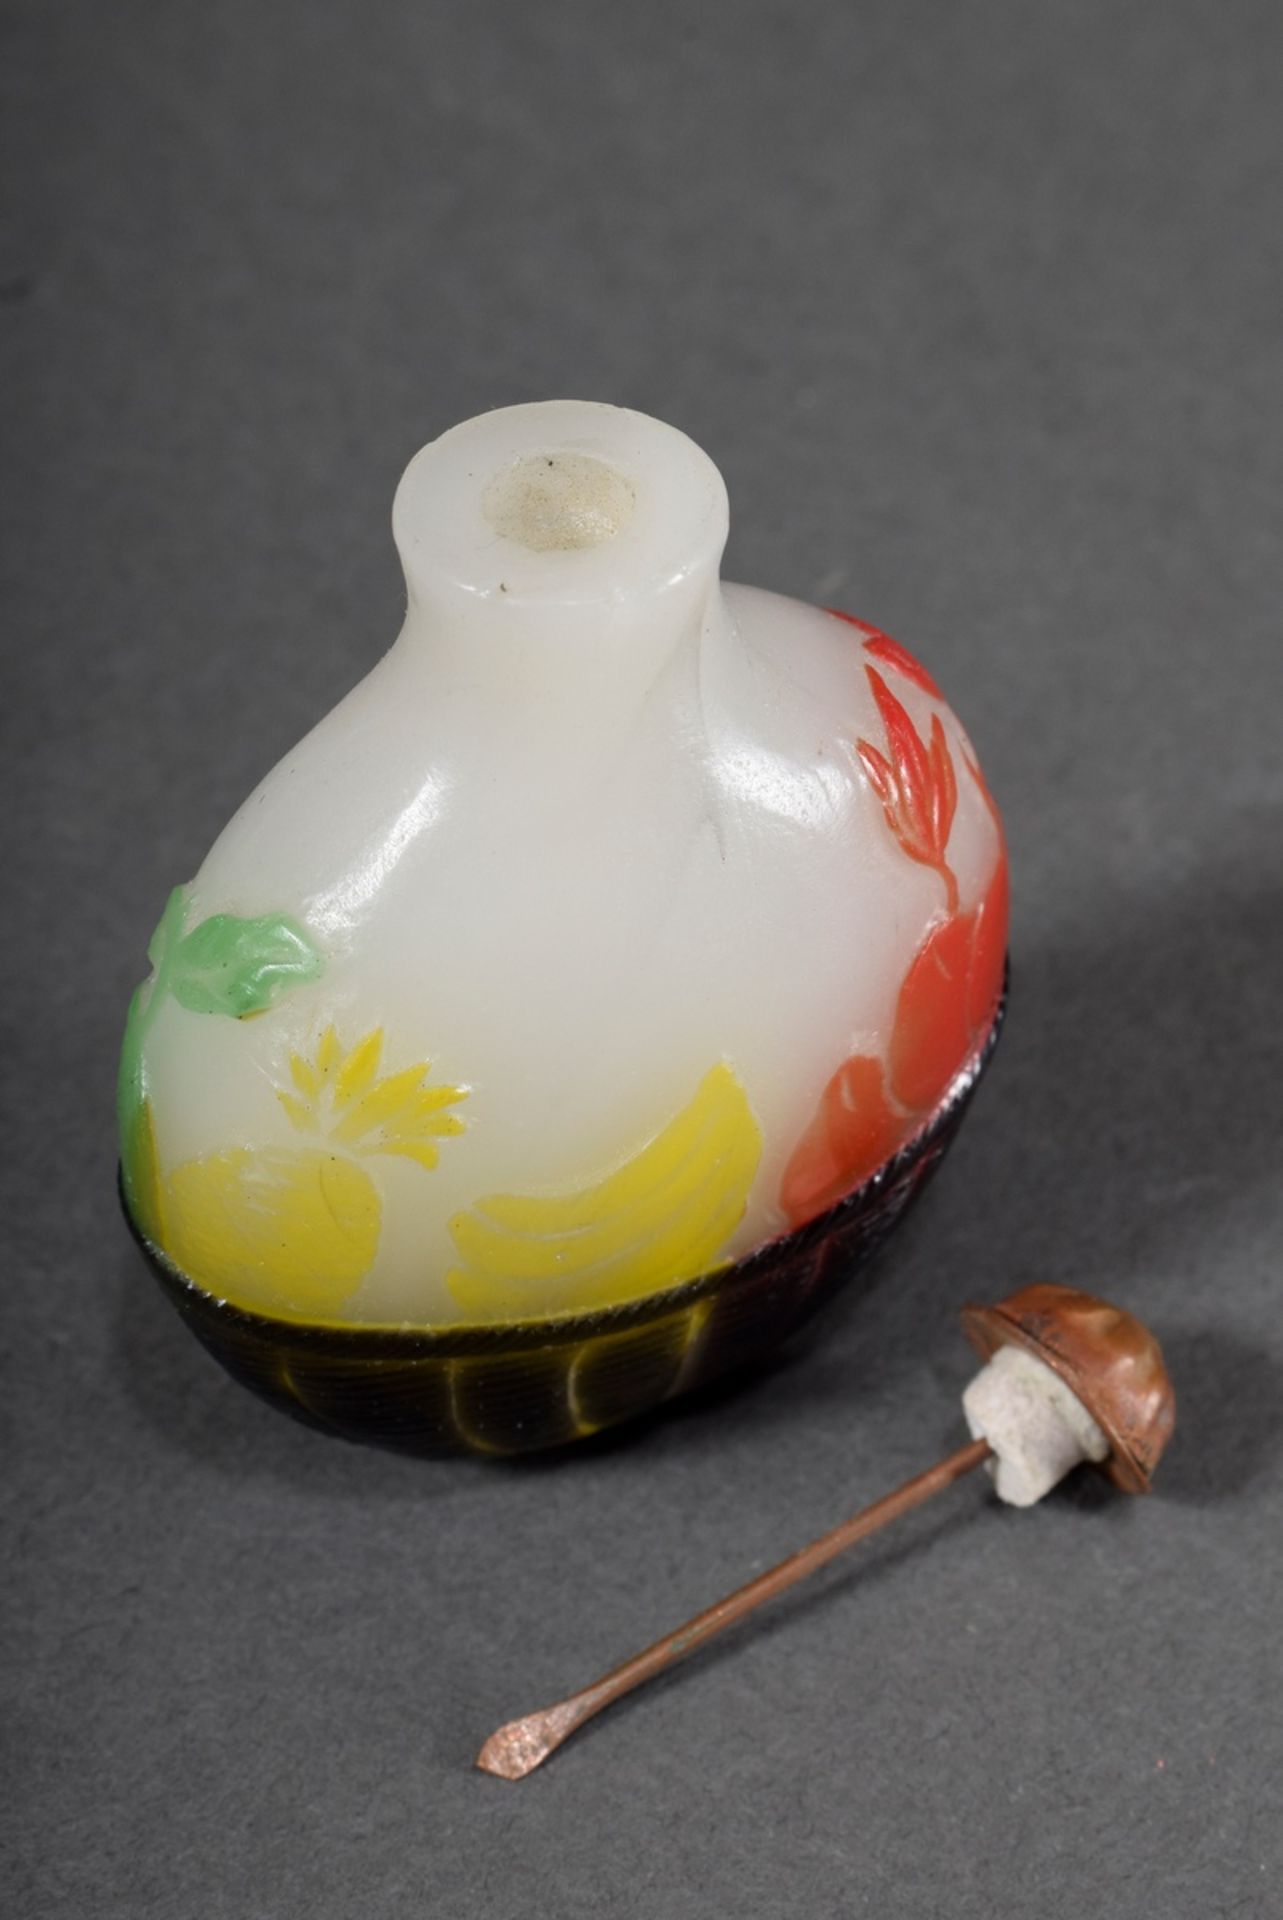 Peking glass snuffbottle with multicoloured overlay "fruits", metal lid, h. 6,5cm, min. bumped - Image 4 of 4